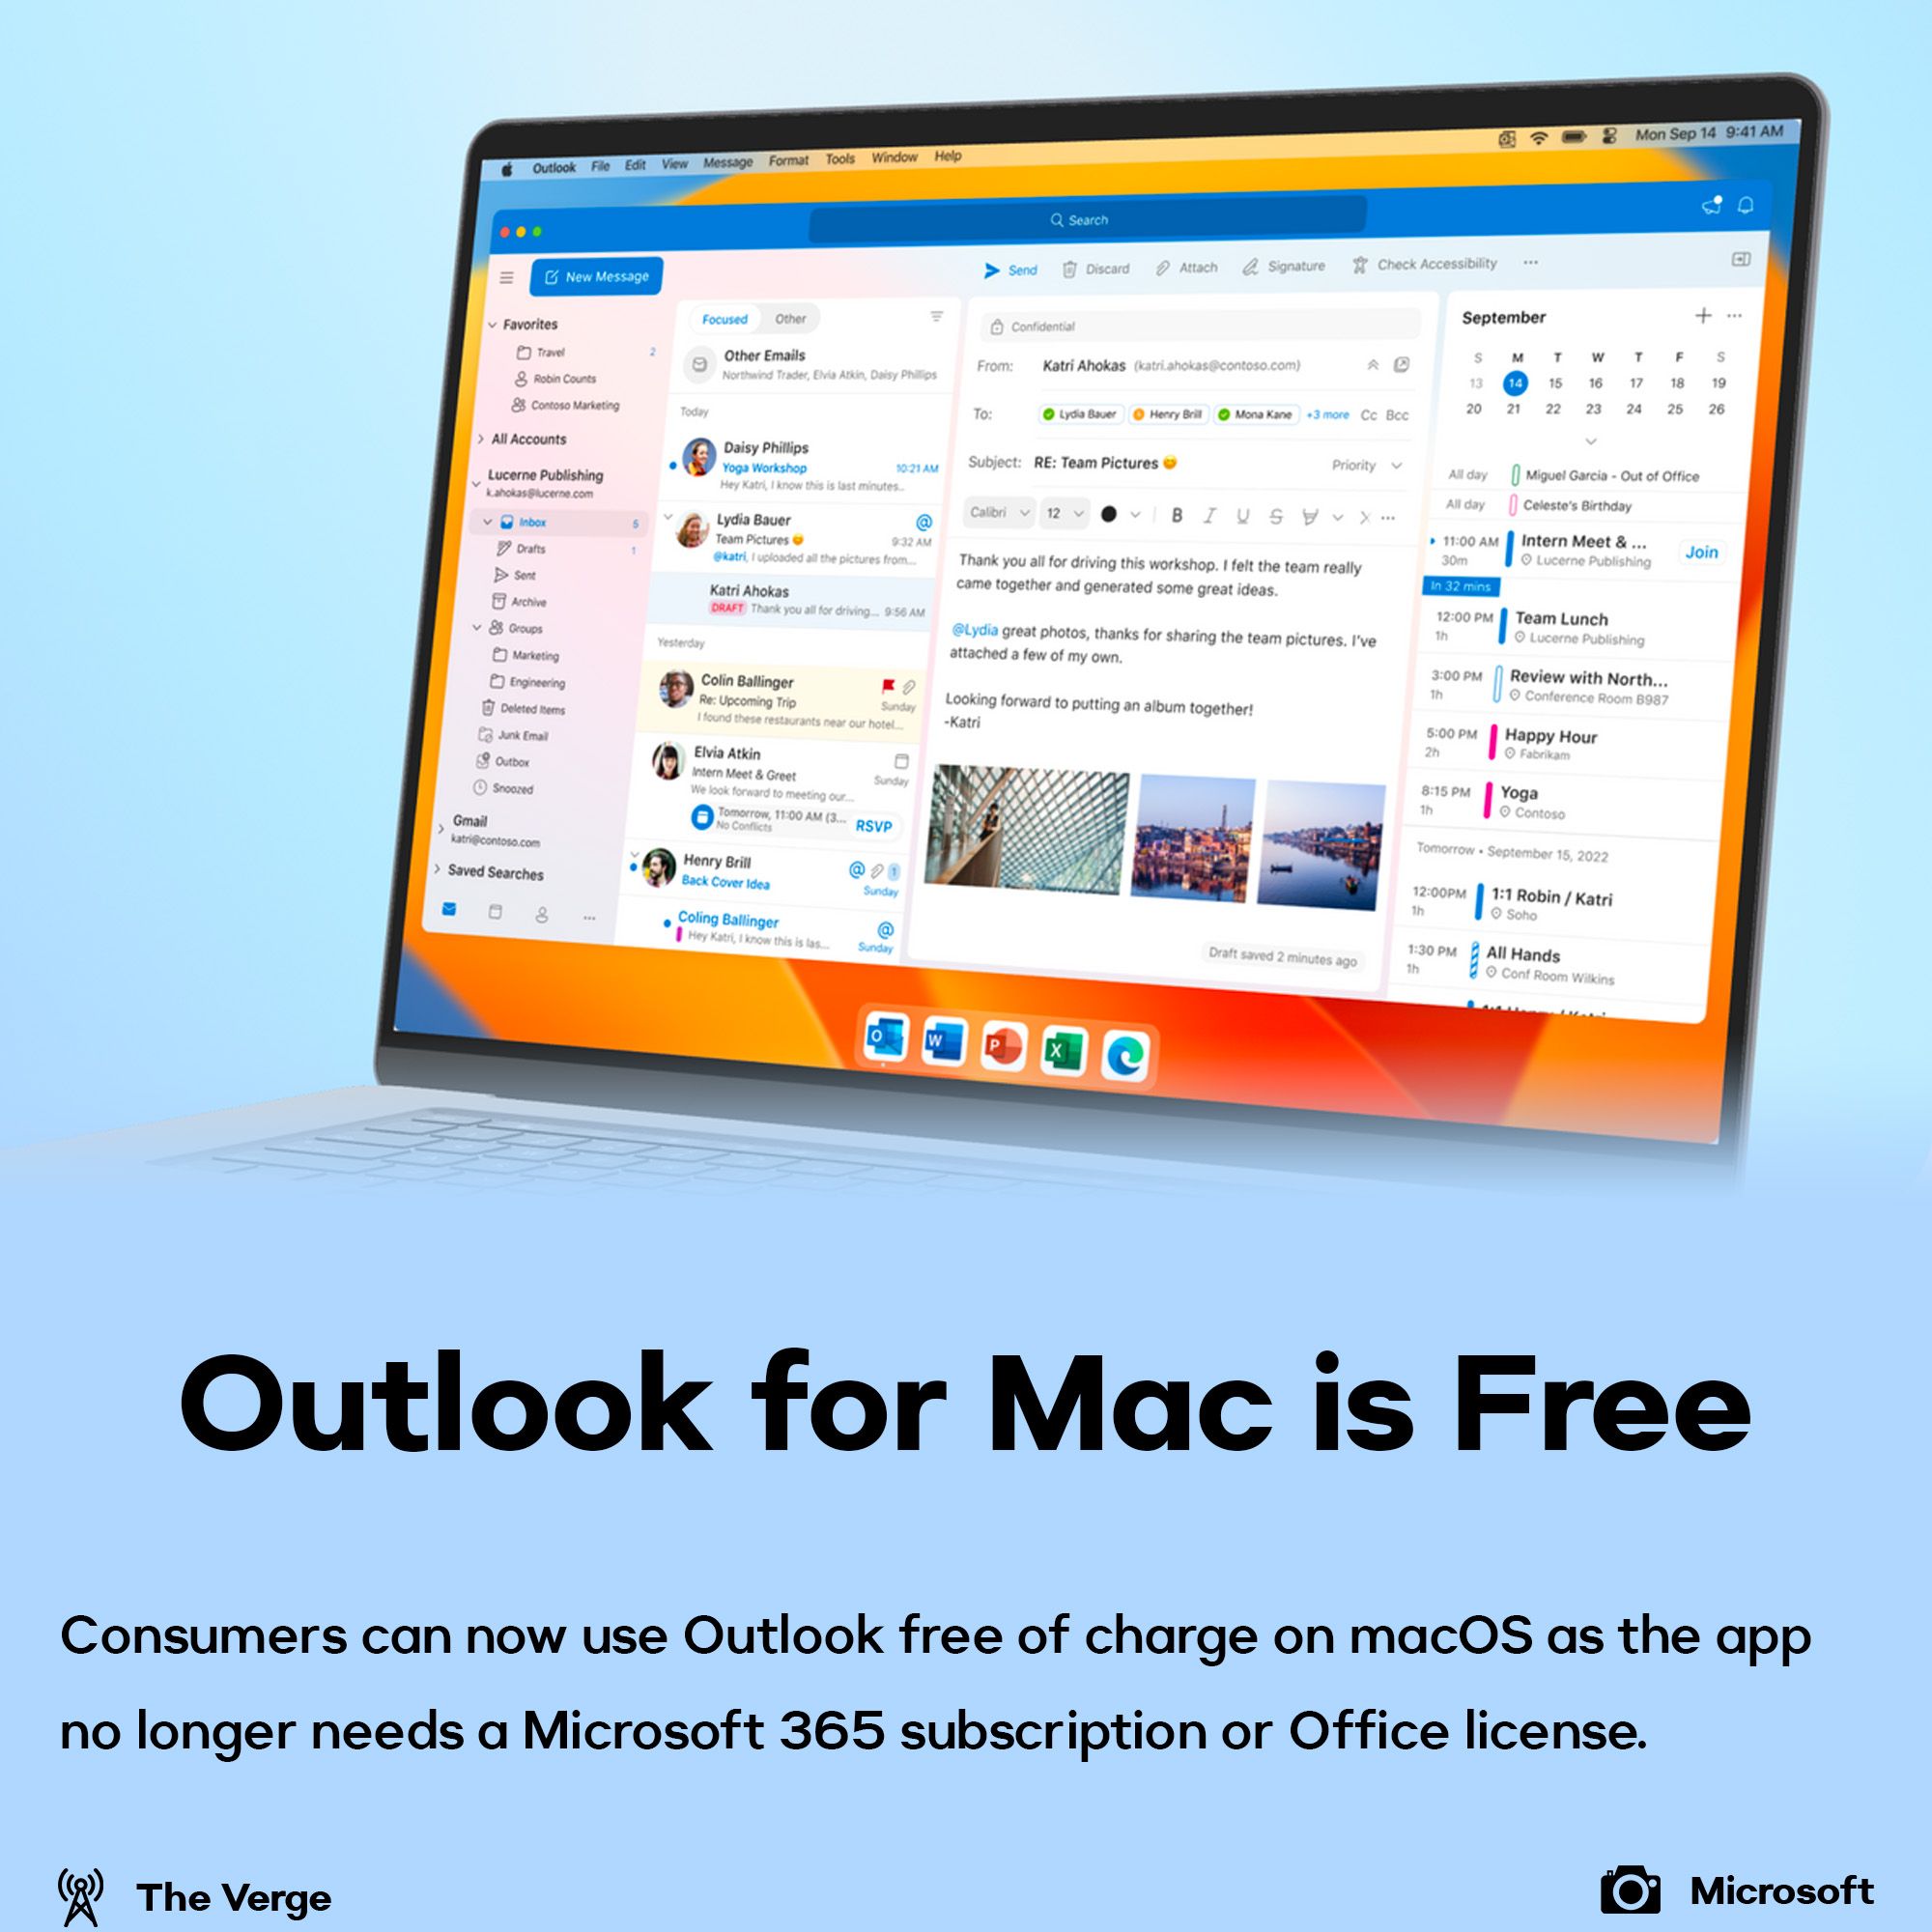 Outlook for Mac is free